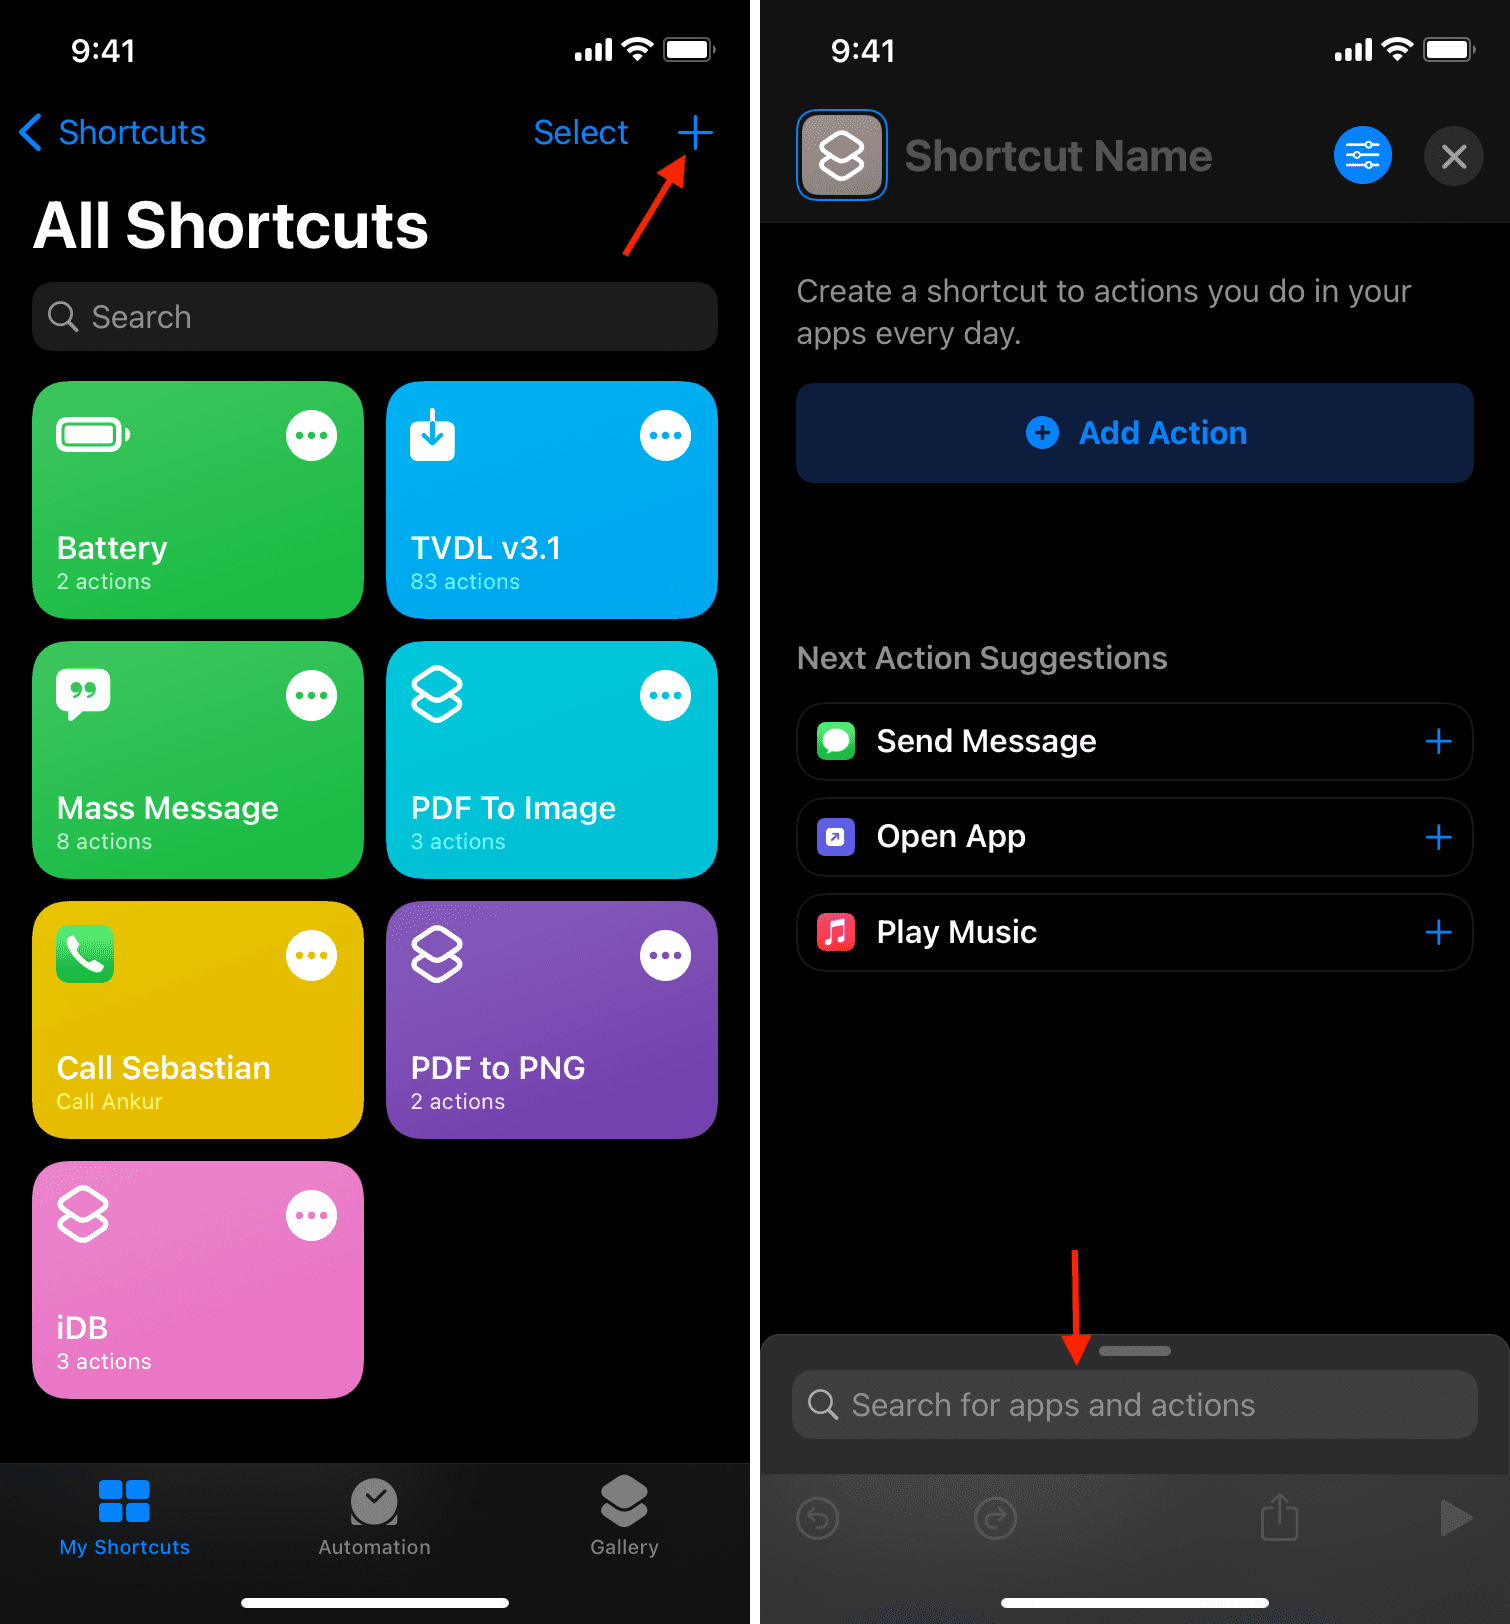 Search for apps and actions in the Shortcuts app